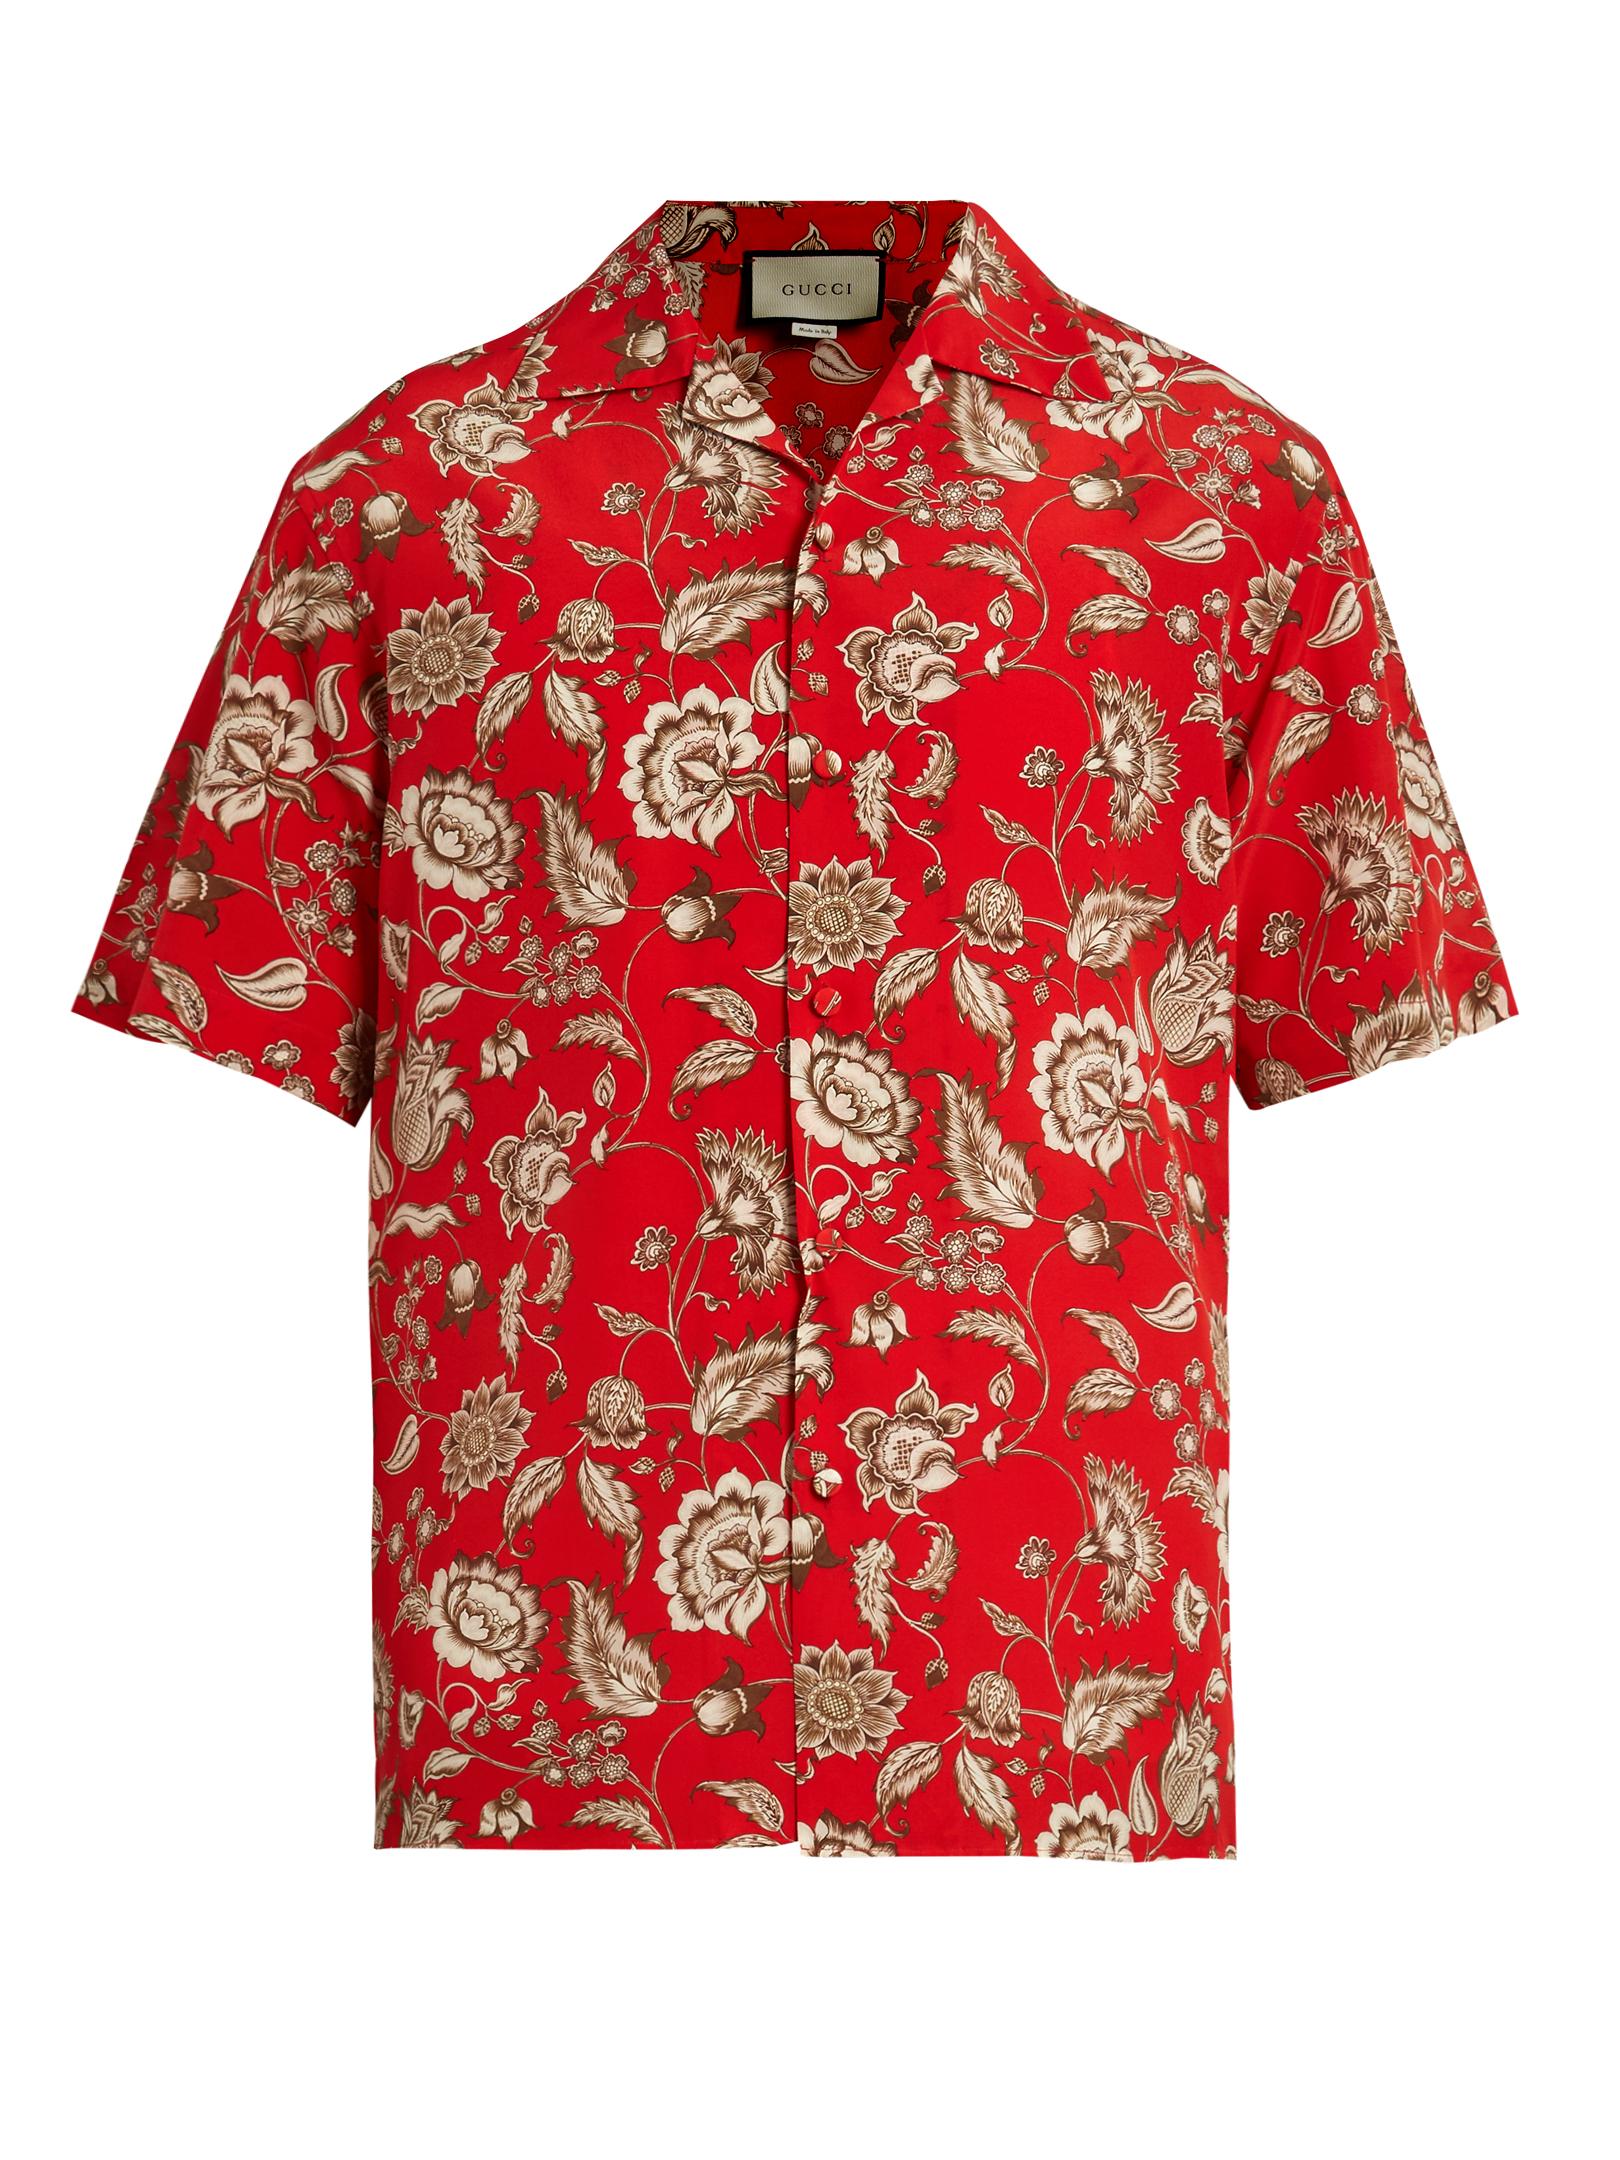 Gucci Camp-collar Floral-print Silk Shirt in Red for Men - Lyst